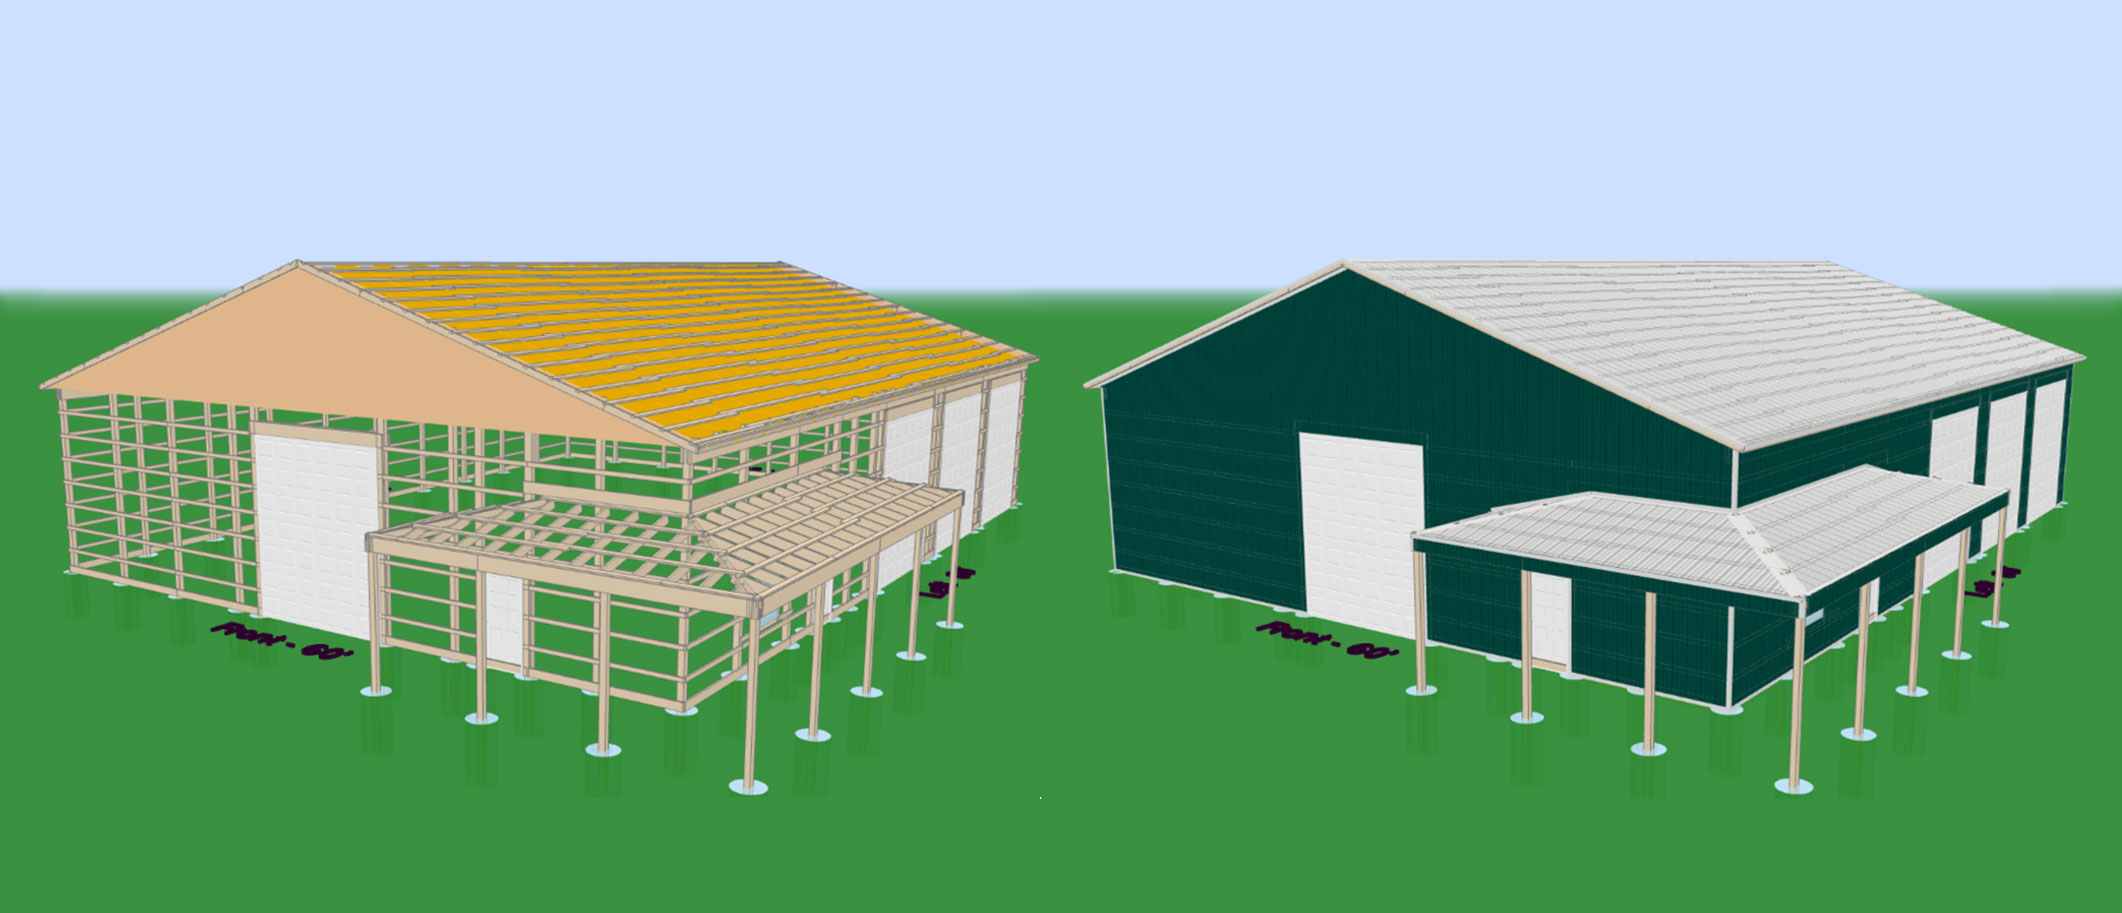 SmartBuild Systems for Pole Barns: Efficiency in Action